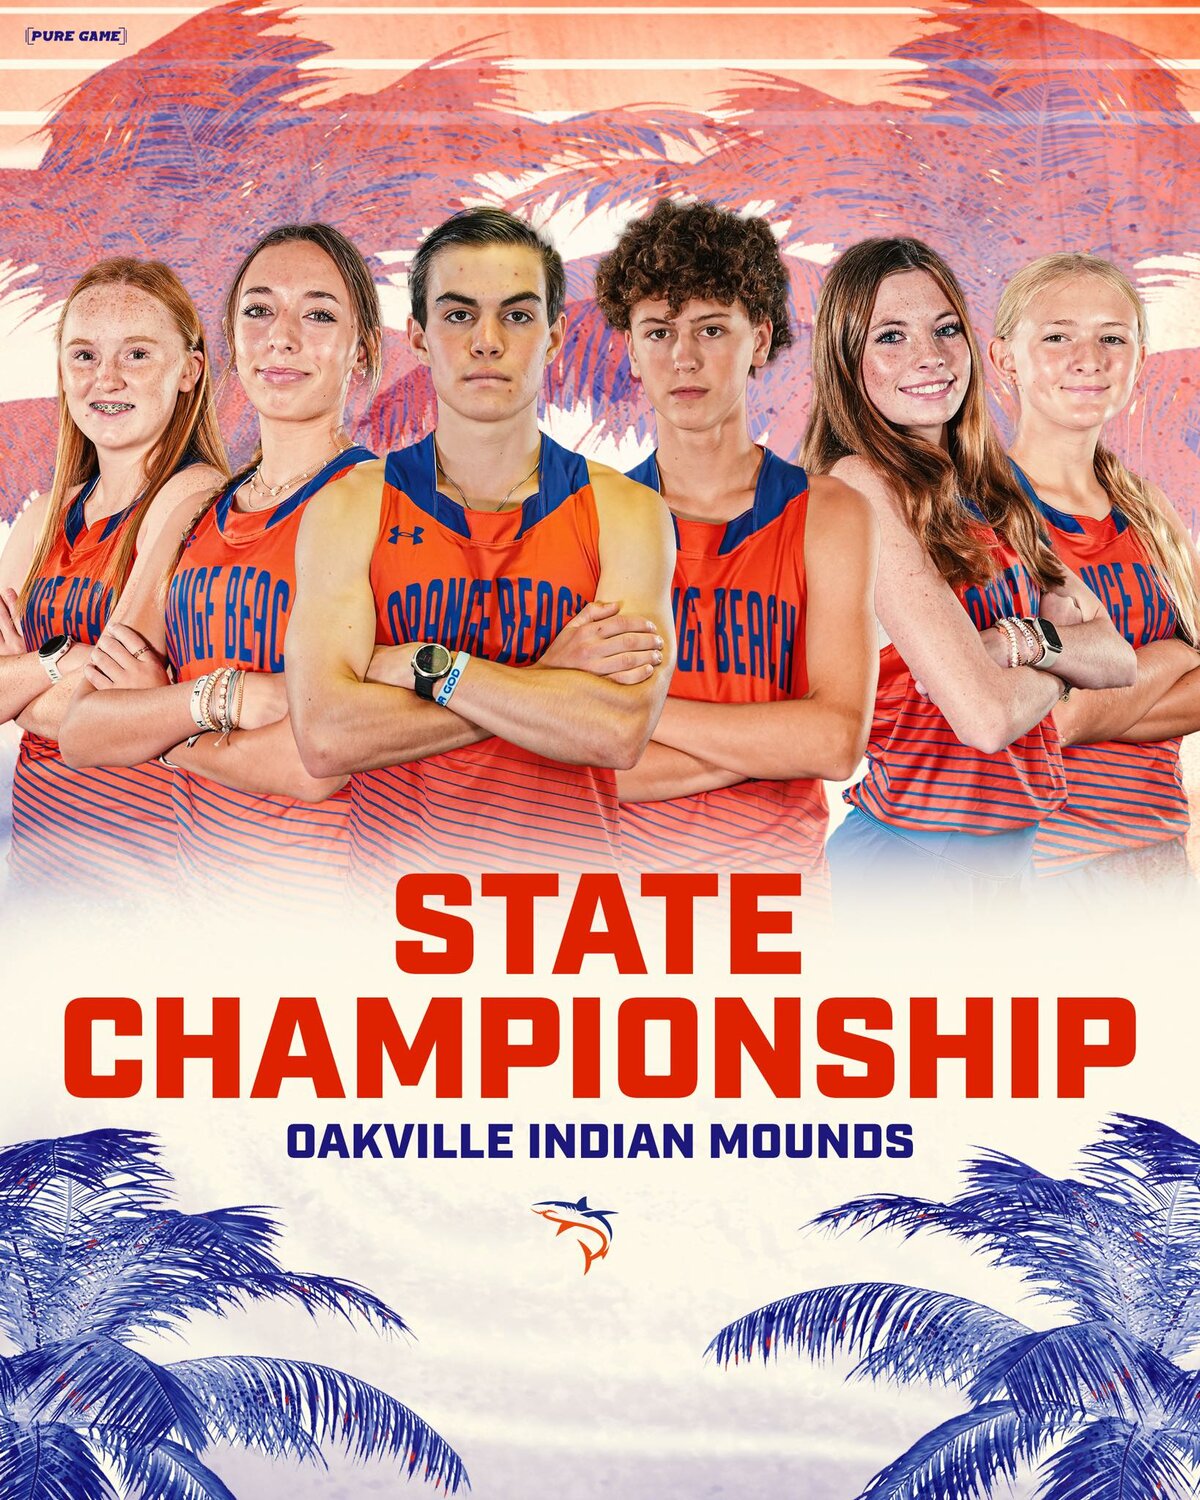 From the beach to state, the Orange Beach Makos had eight runners qualify for the last race of the season and half of them recorded top-30 finishes on the Class 4A stage.